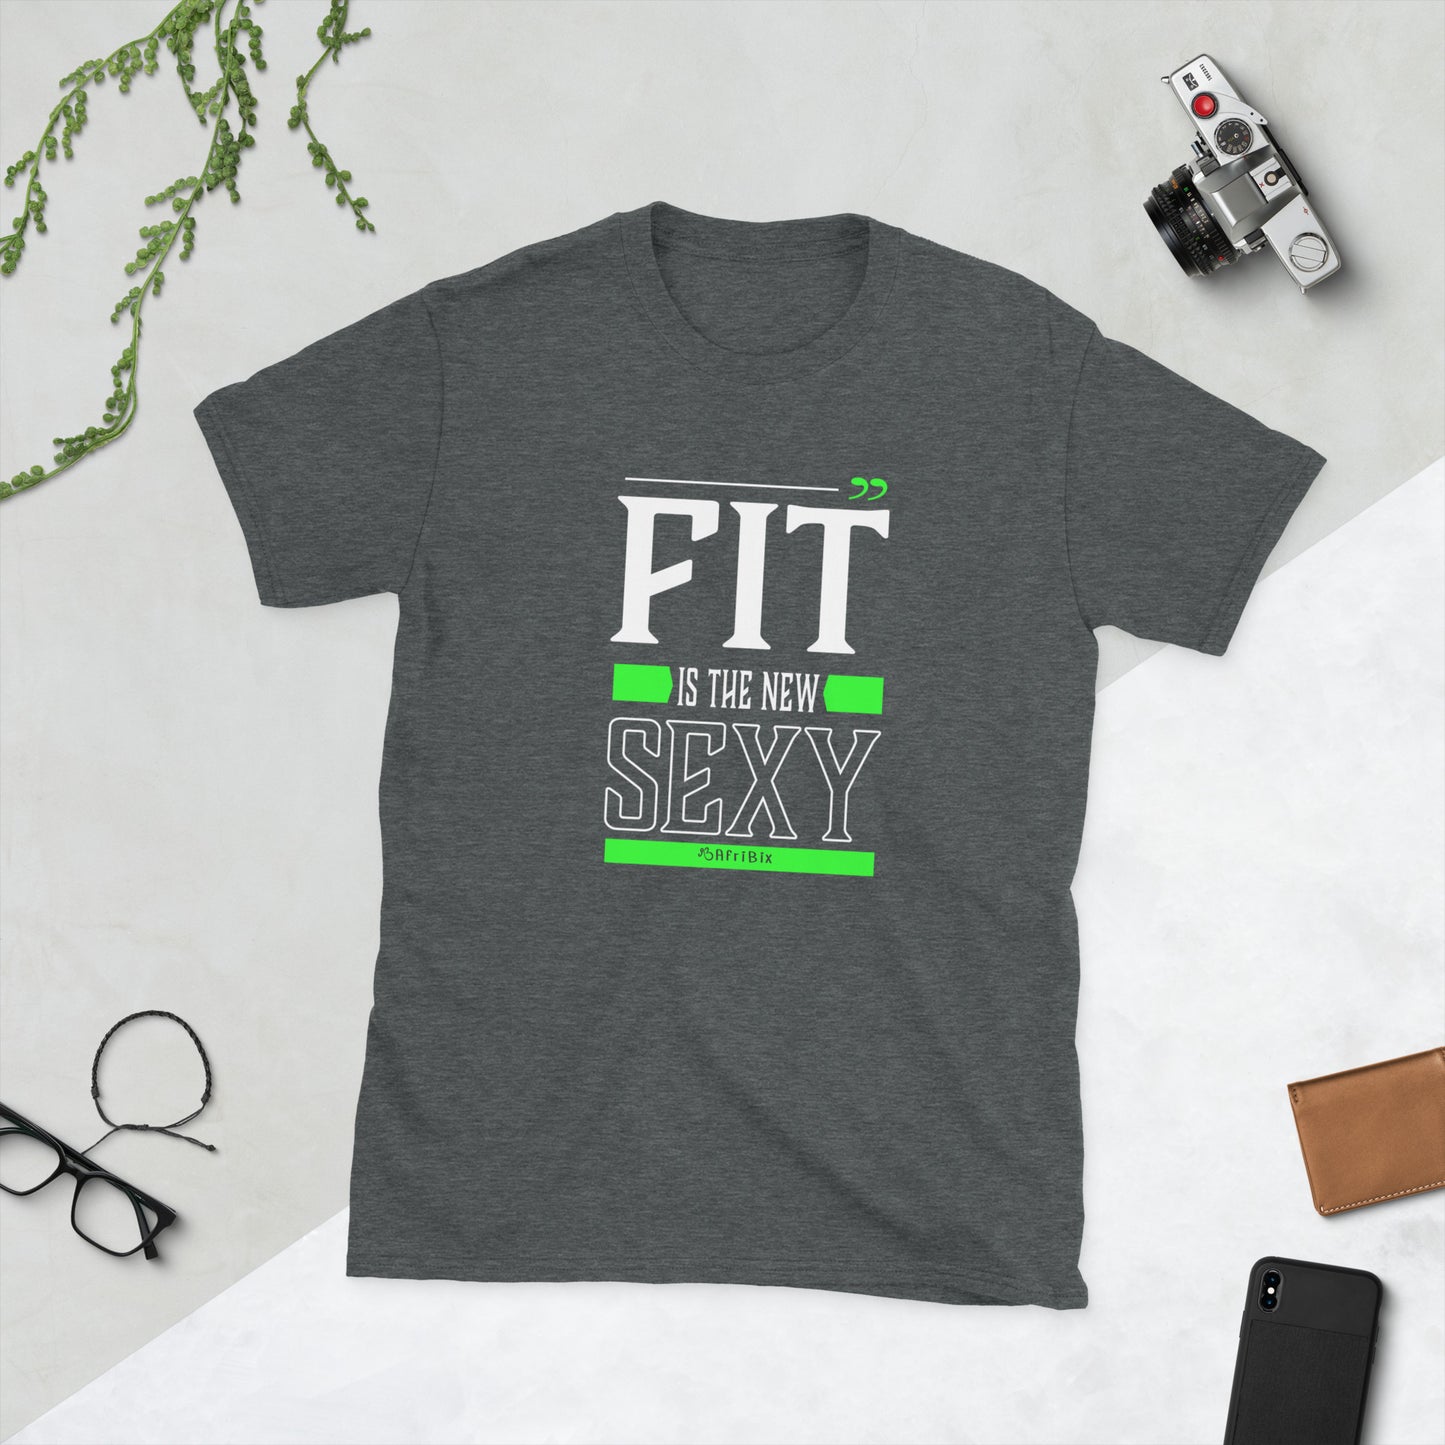 Slogan Word Art Short-Sleeve Unisex T-Shirt - Fit is the New Sexy